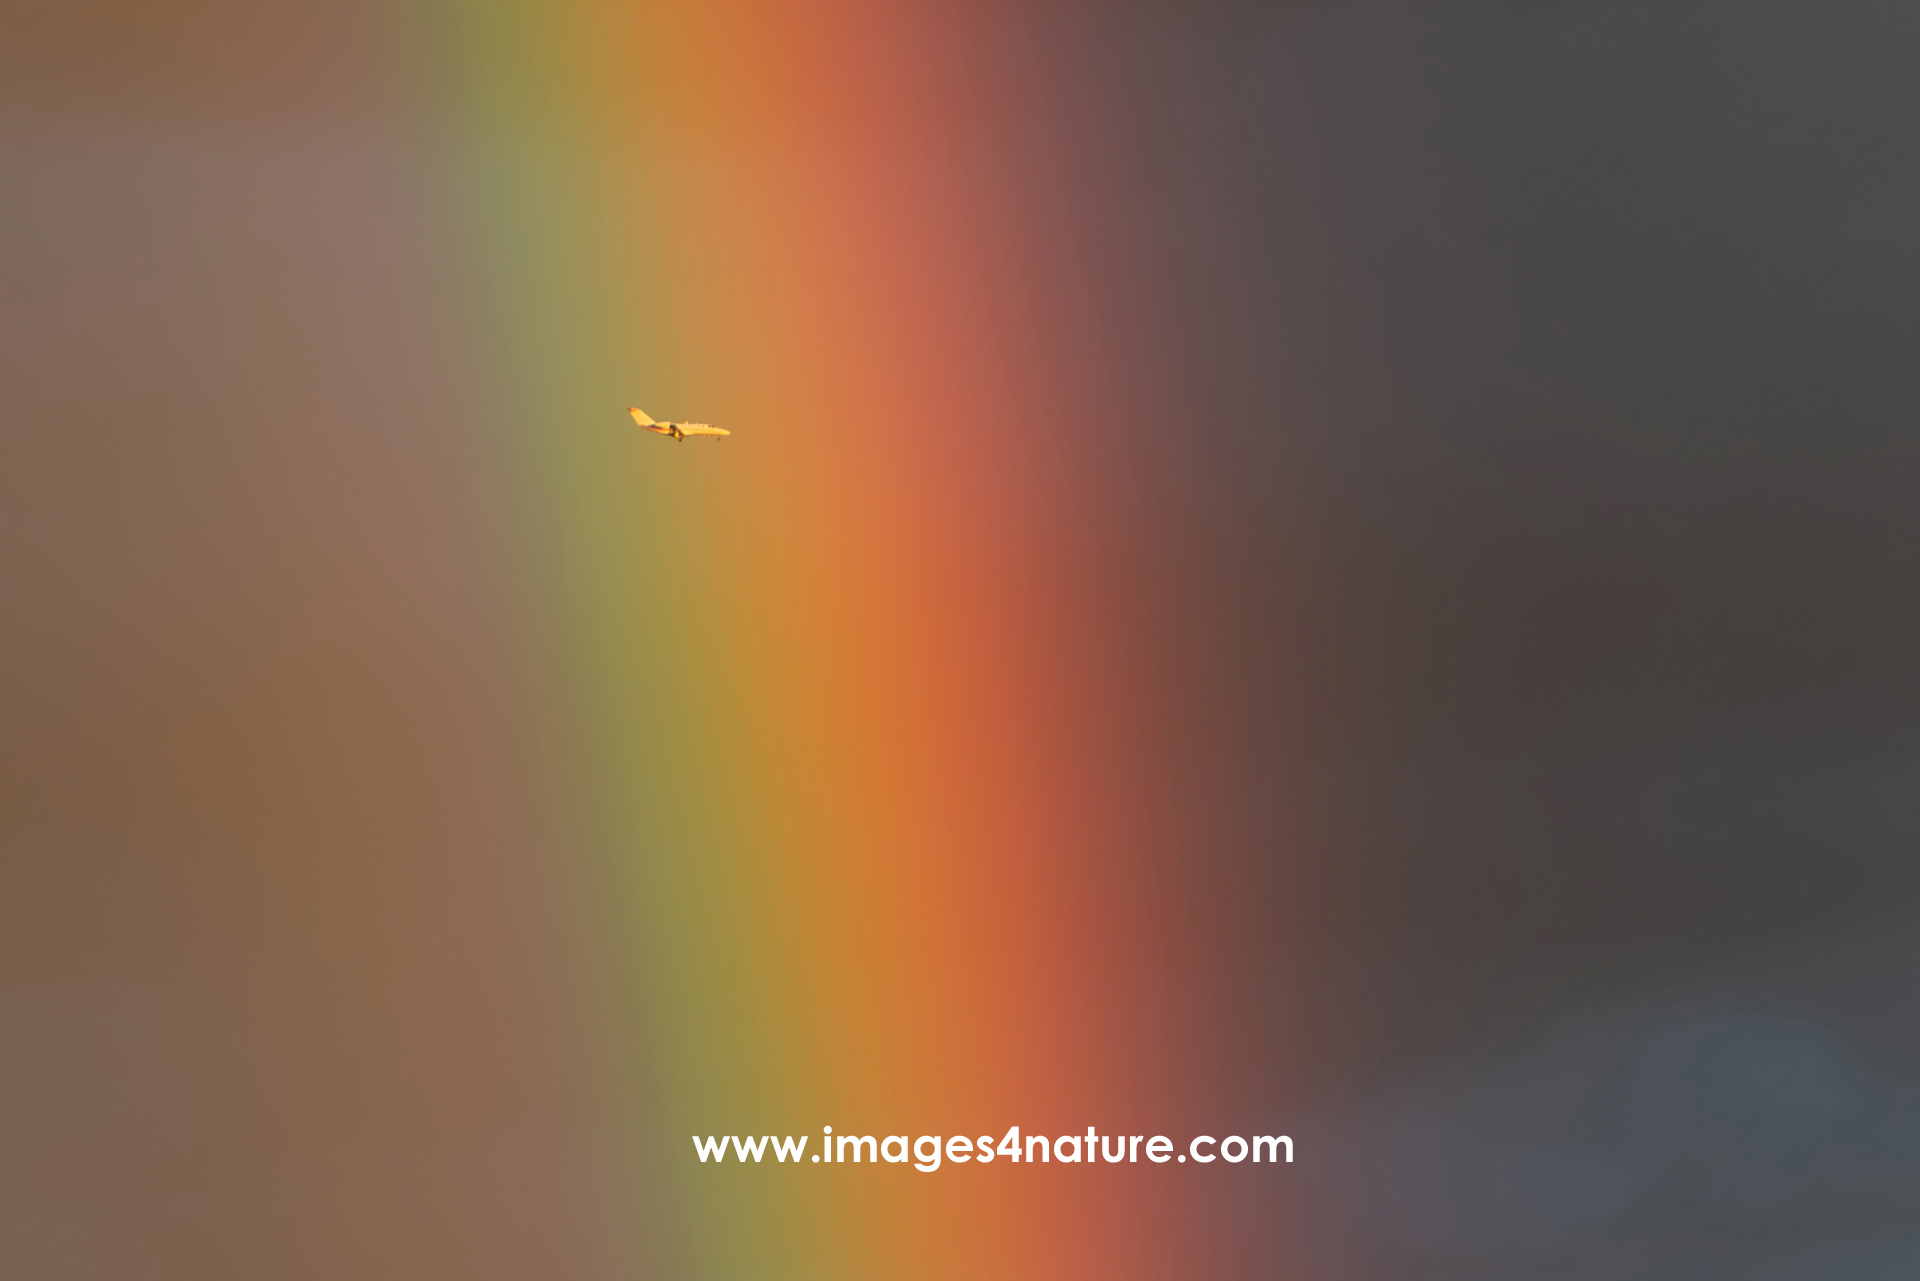 Closeup on a rainbow with a small jet plane flying though it